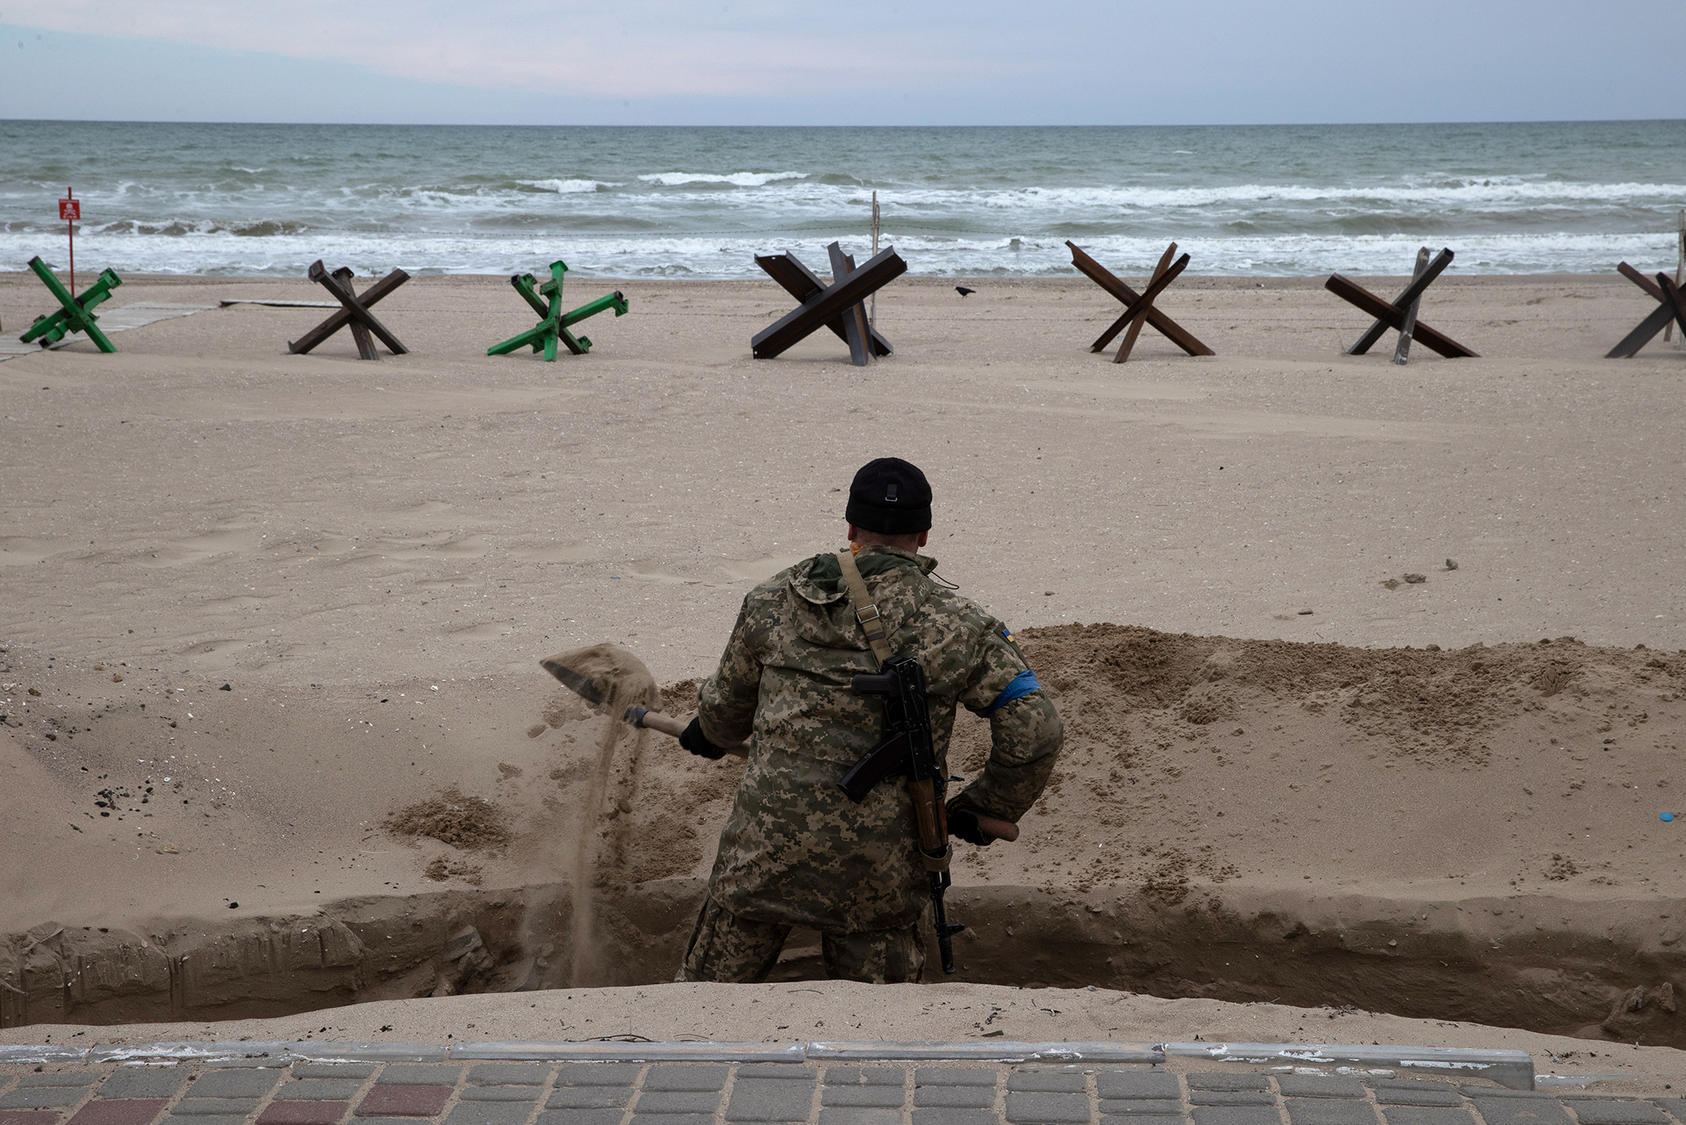 A Ukrainian soldier digs a trench in Odesa, Ukraine, on Wednesday, on March 16, 2022, as they continued to prepare for a Russian attack on the strategic port city. (Tyler Hicks/The New York Times)